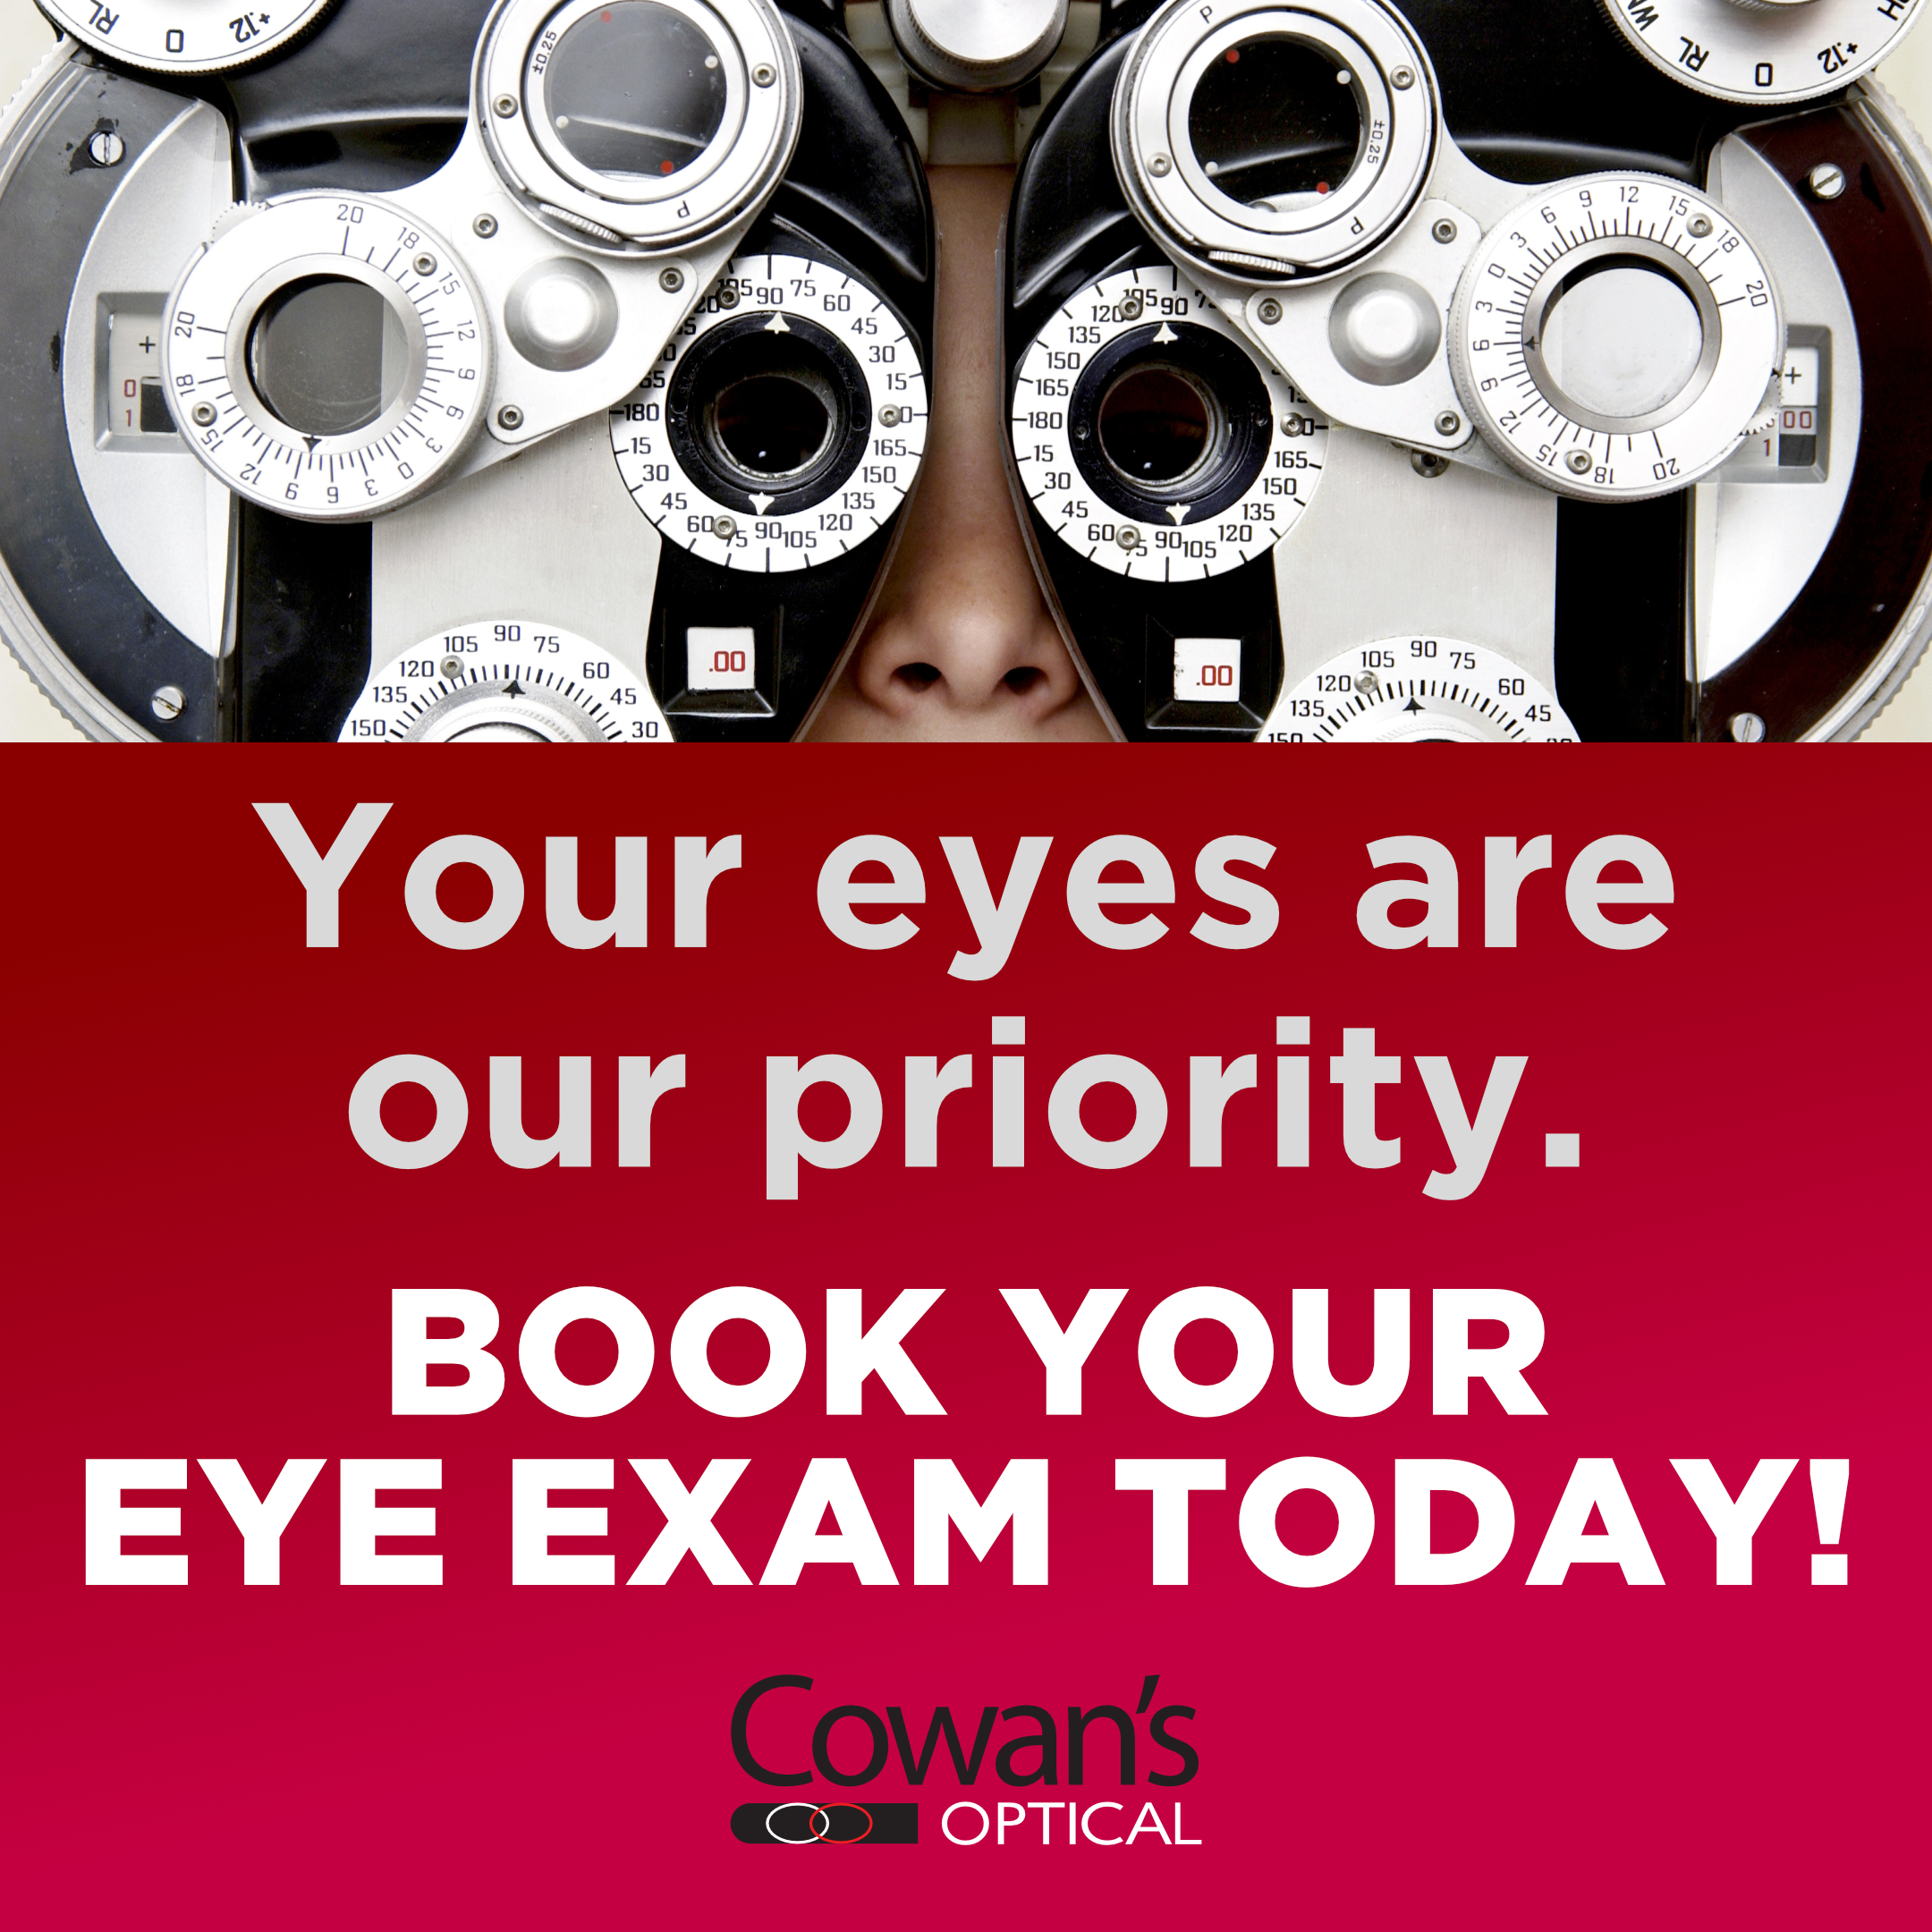 Cowan's Optical buy 2 frames for the price of 1 and book eye exam black white and red image<br />
